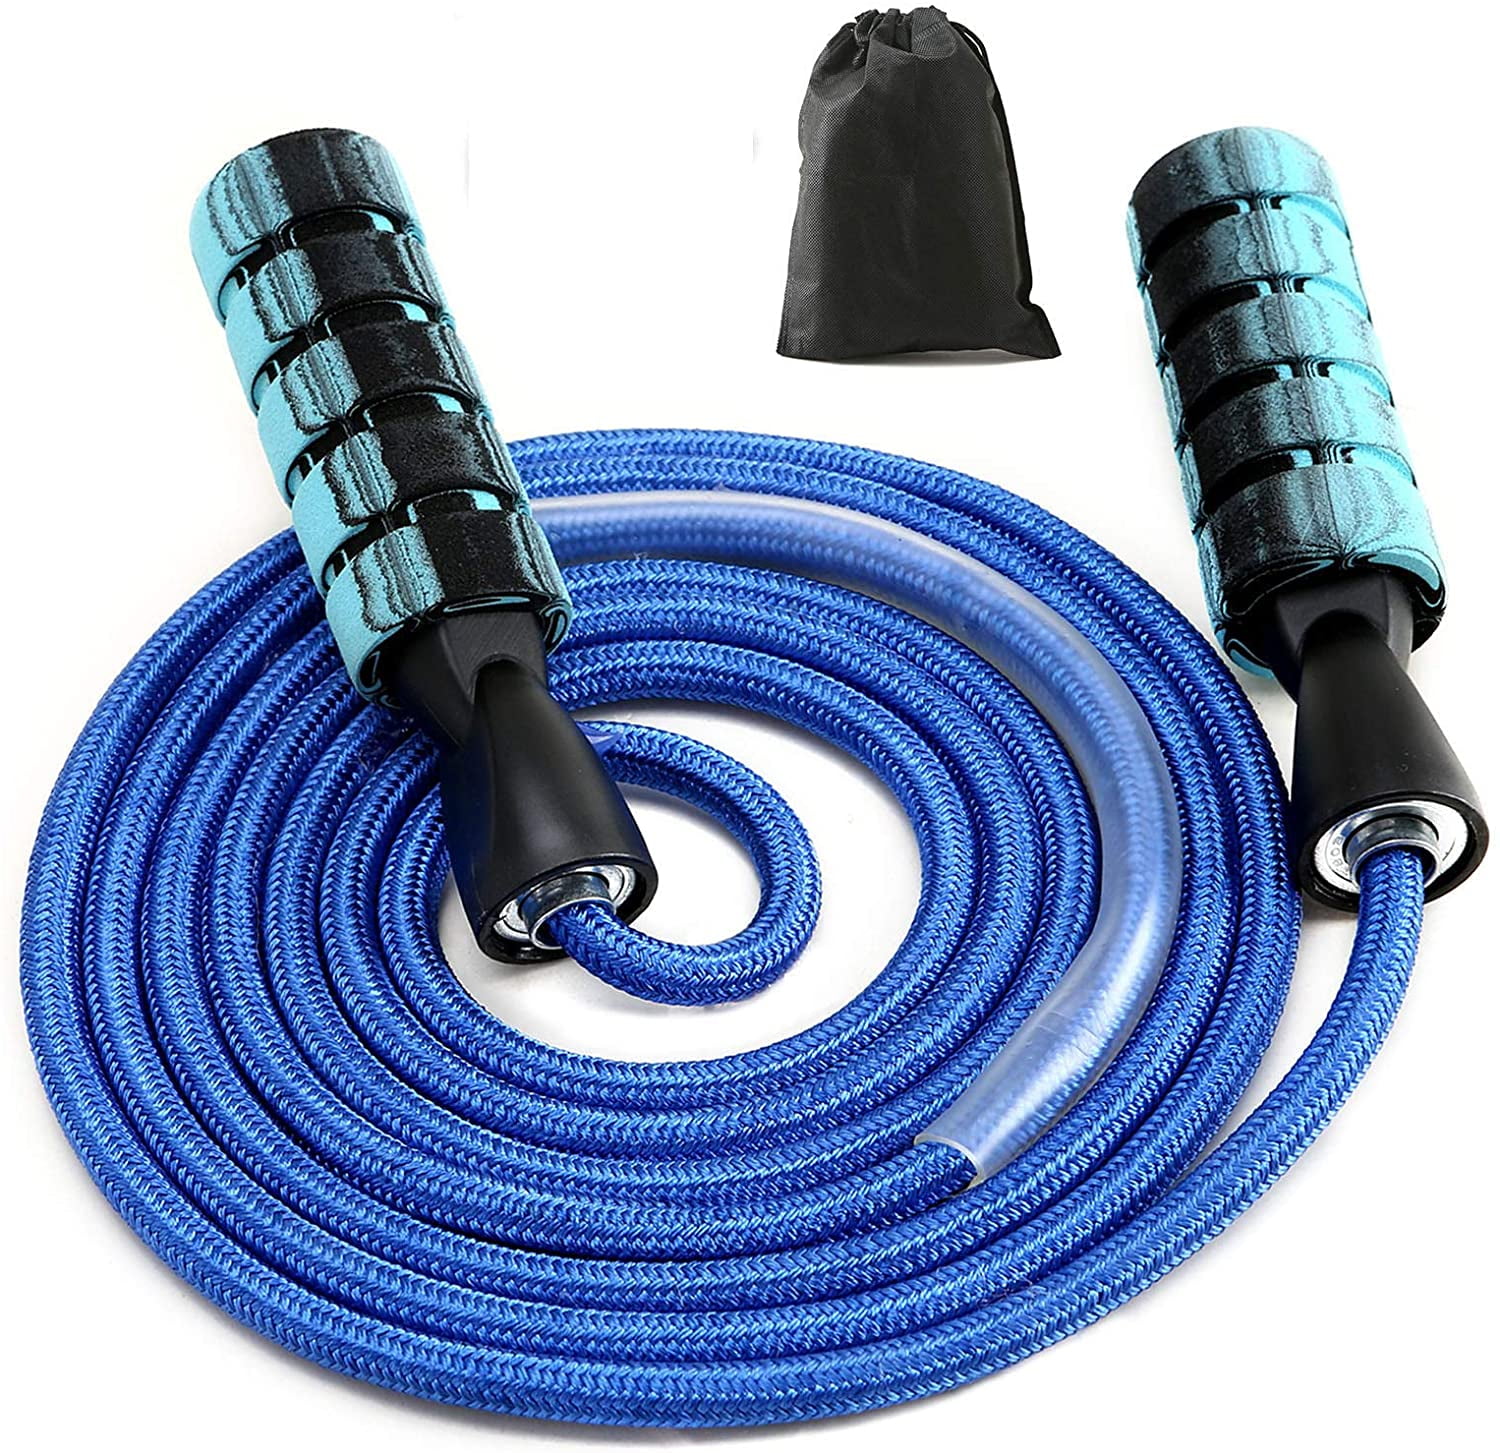 Overstriking Weighted Rope Adjustable Blue-9mm Professional Jump Rope Workout 